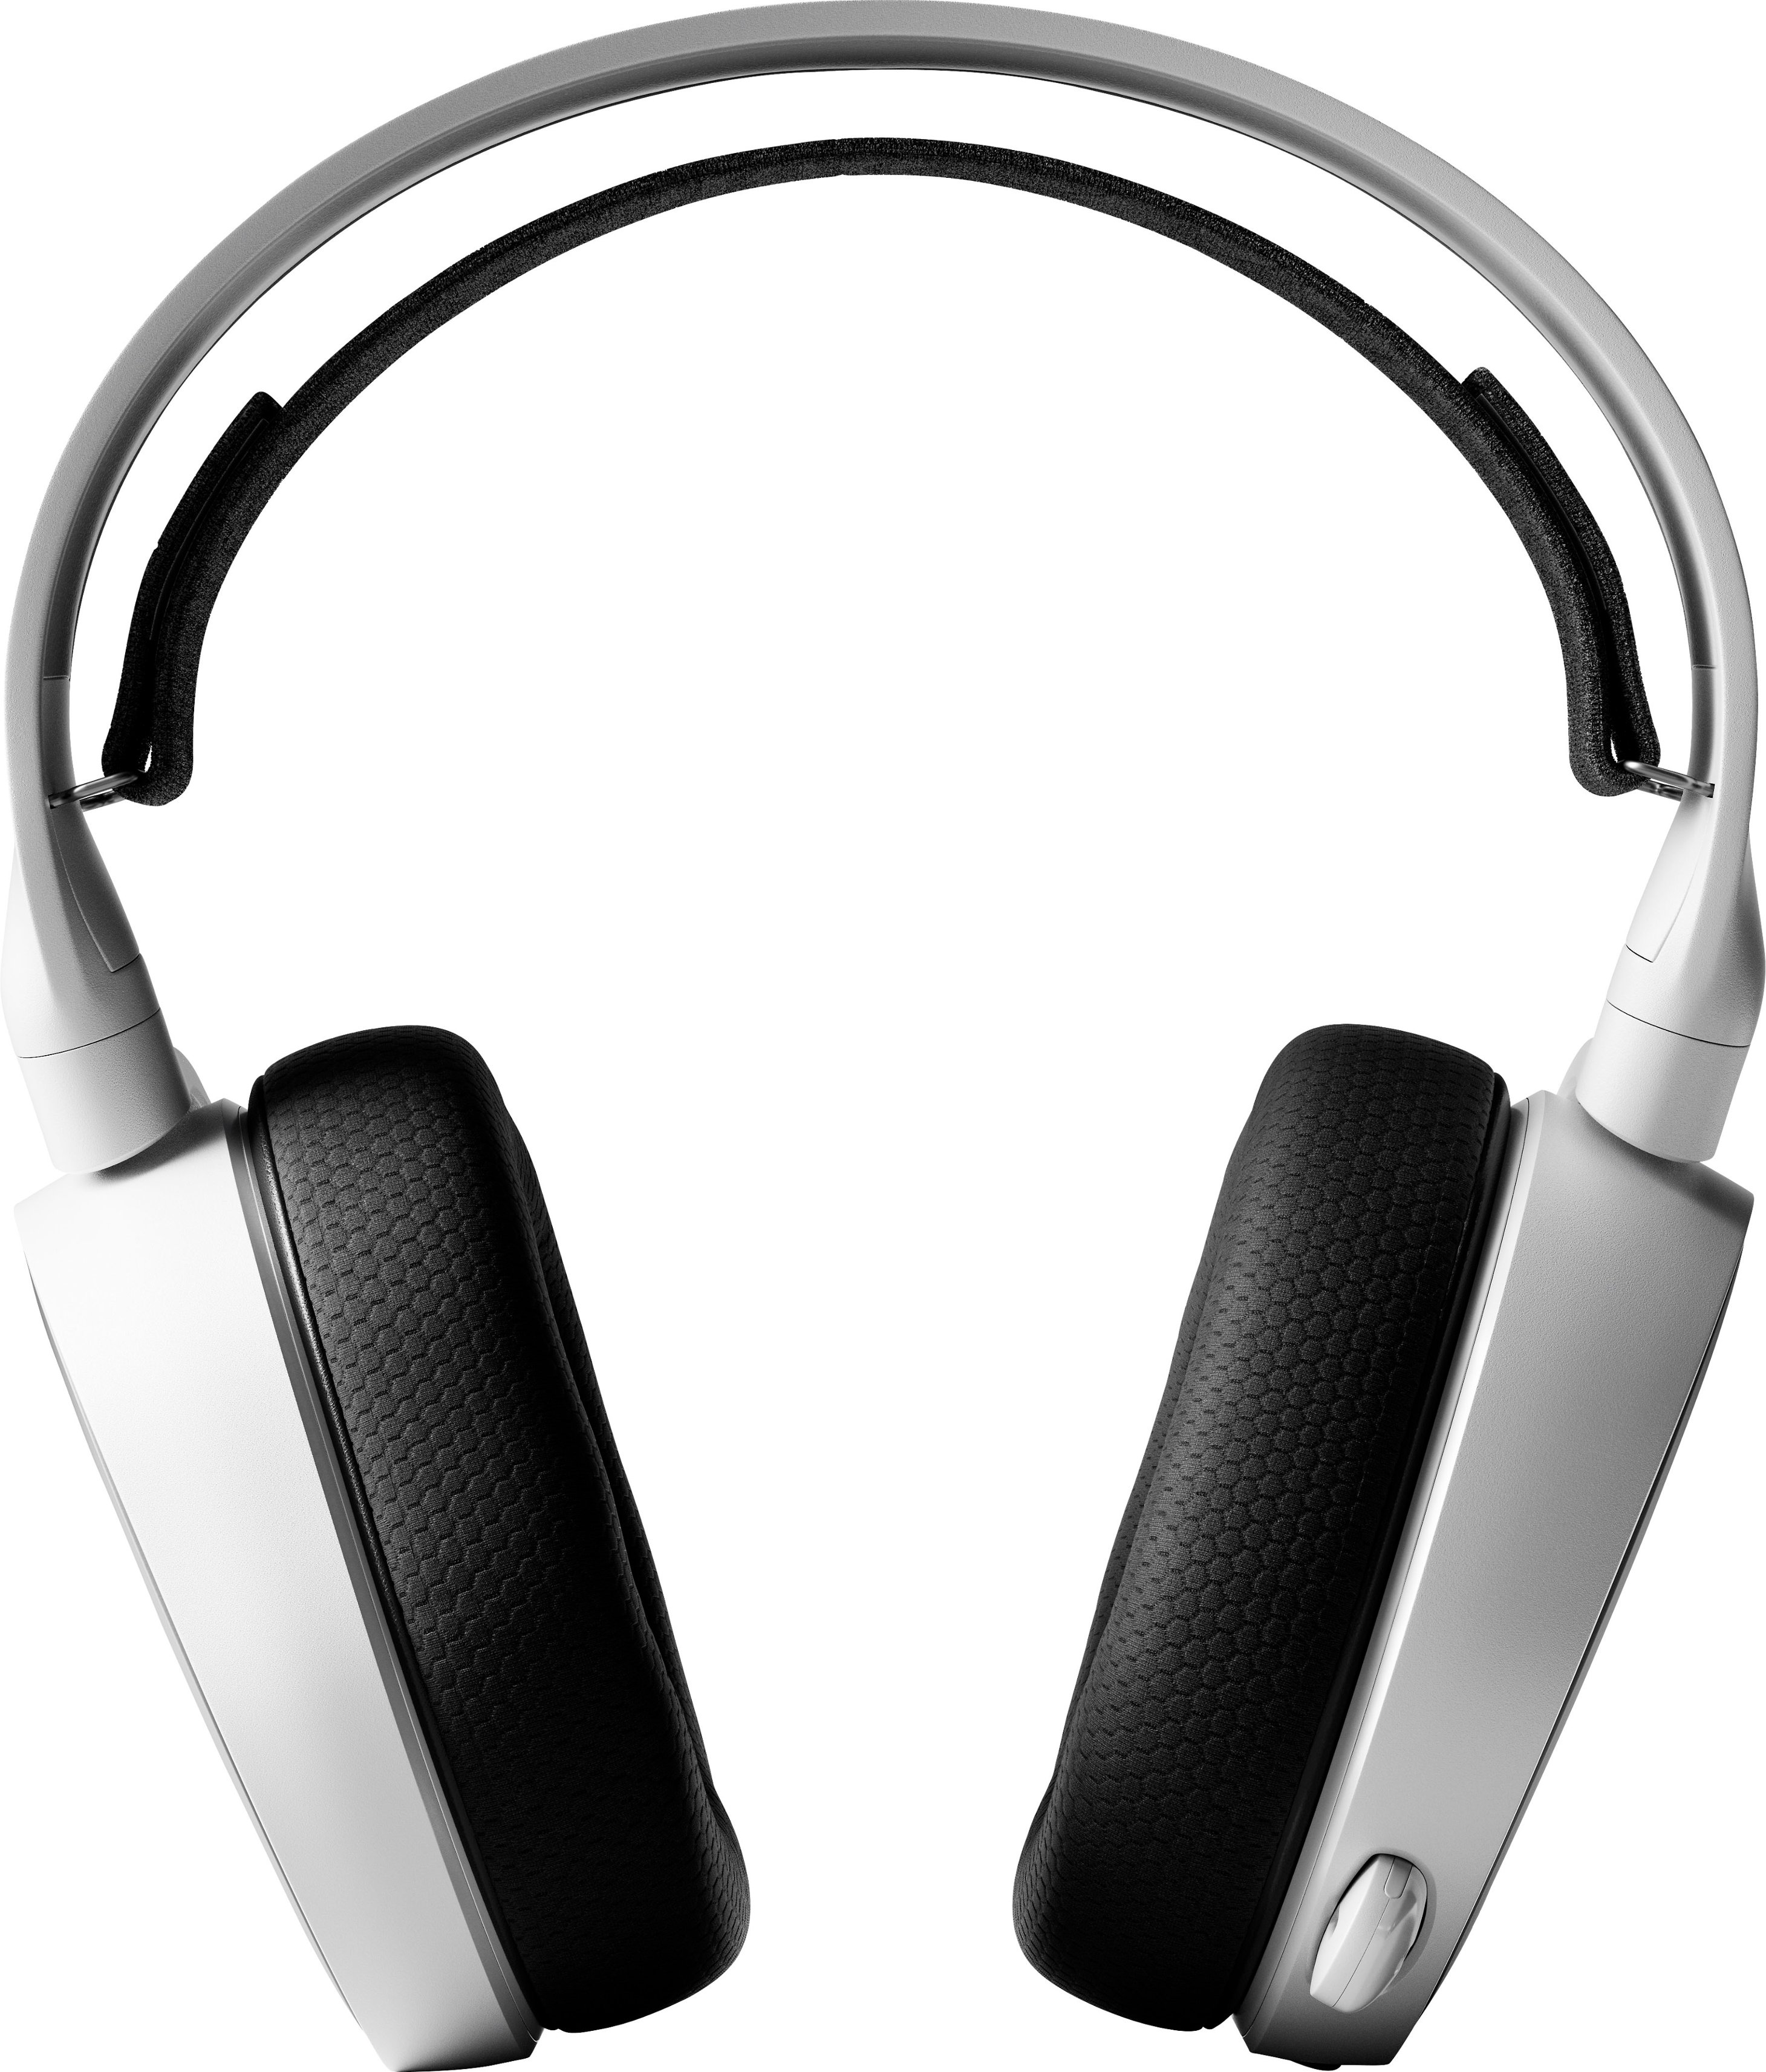 Angle View: SteelSeries - Arctis 3 Wired Gaming Headset for PS5 and PS4 - White